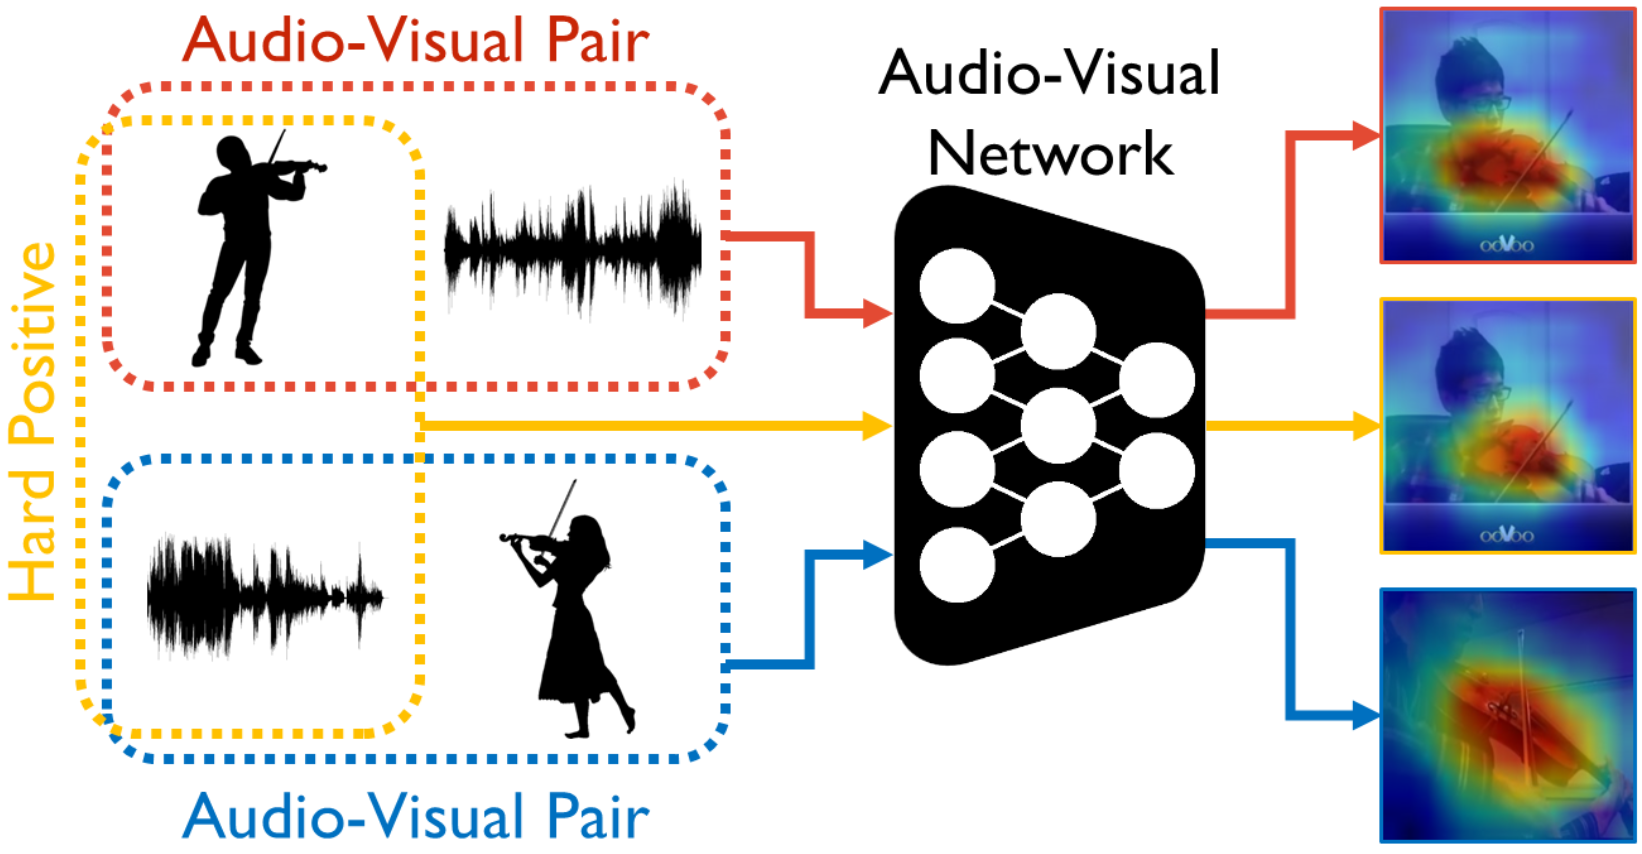 Learning Sound Localization Better from Semantically Similar Samples